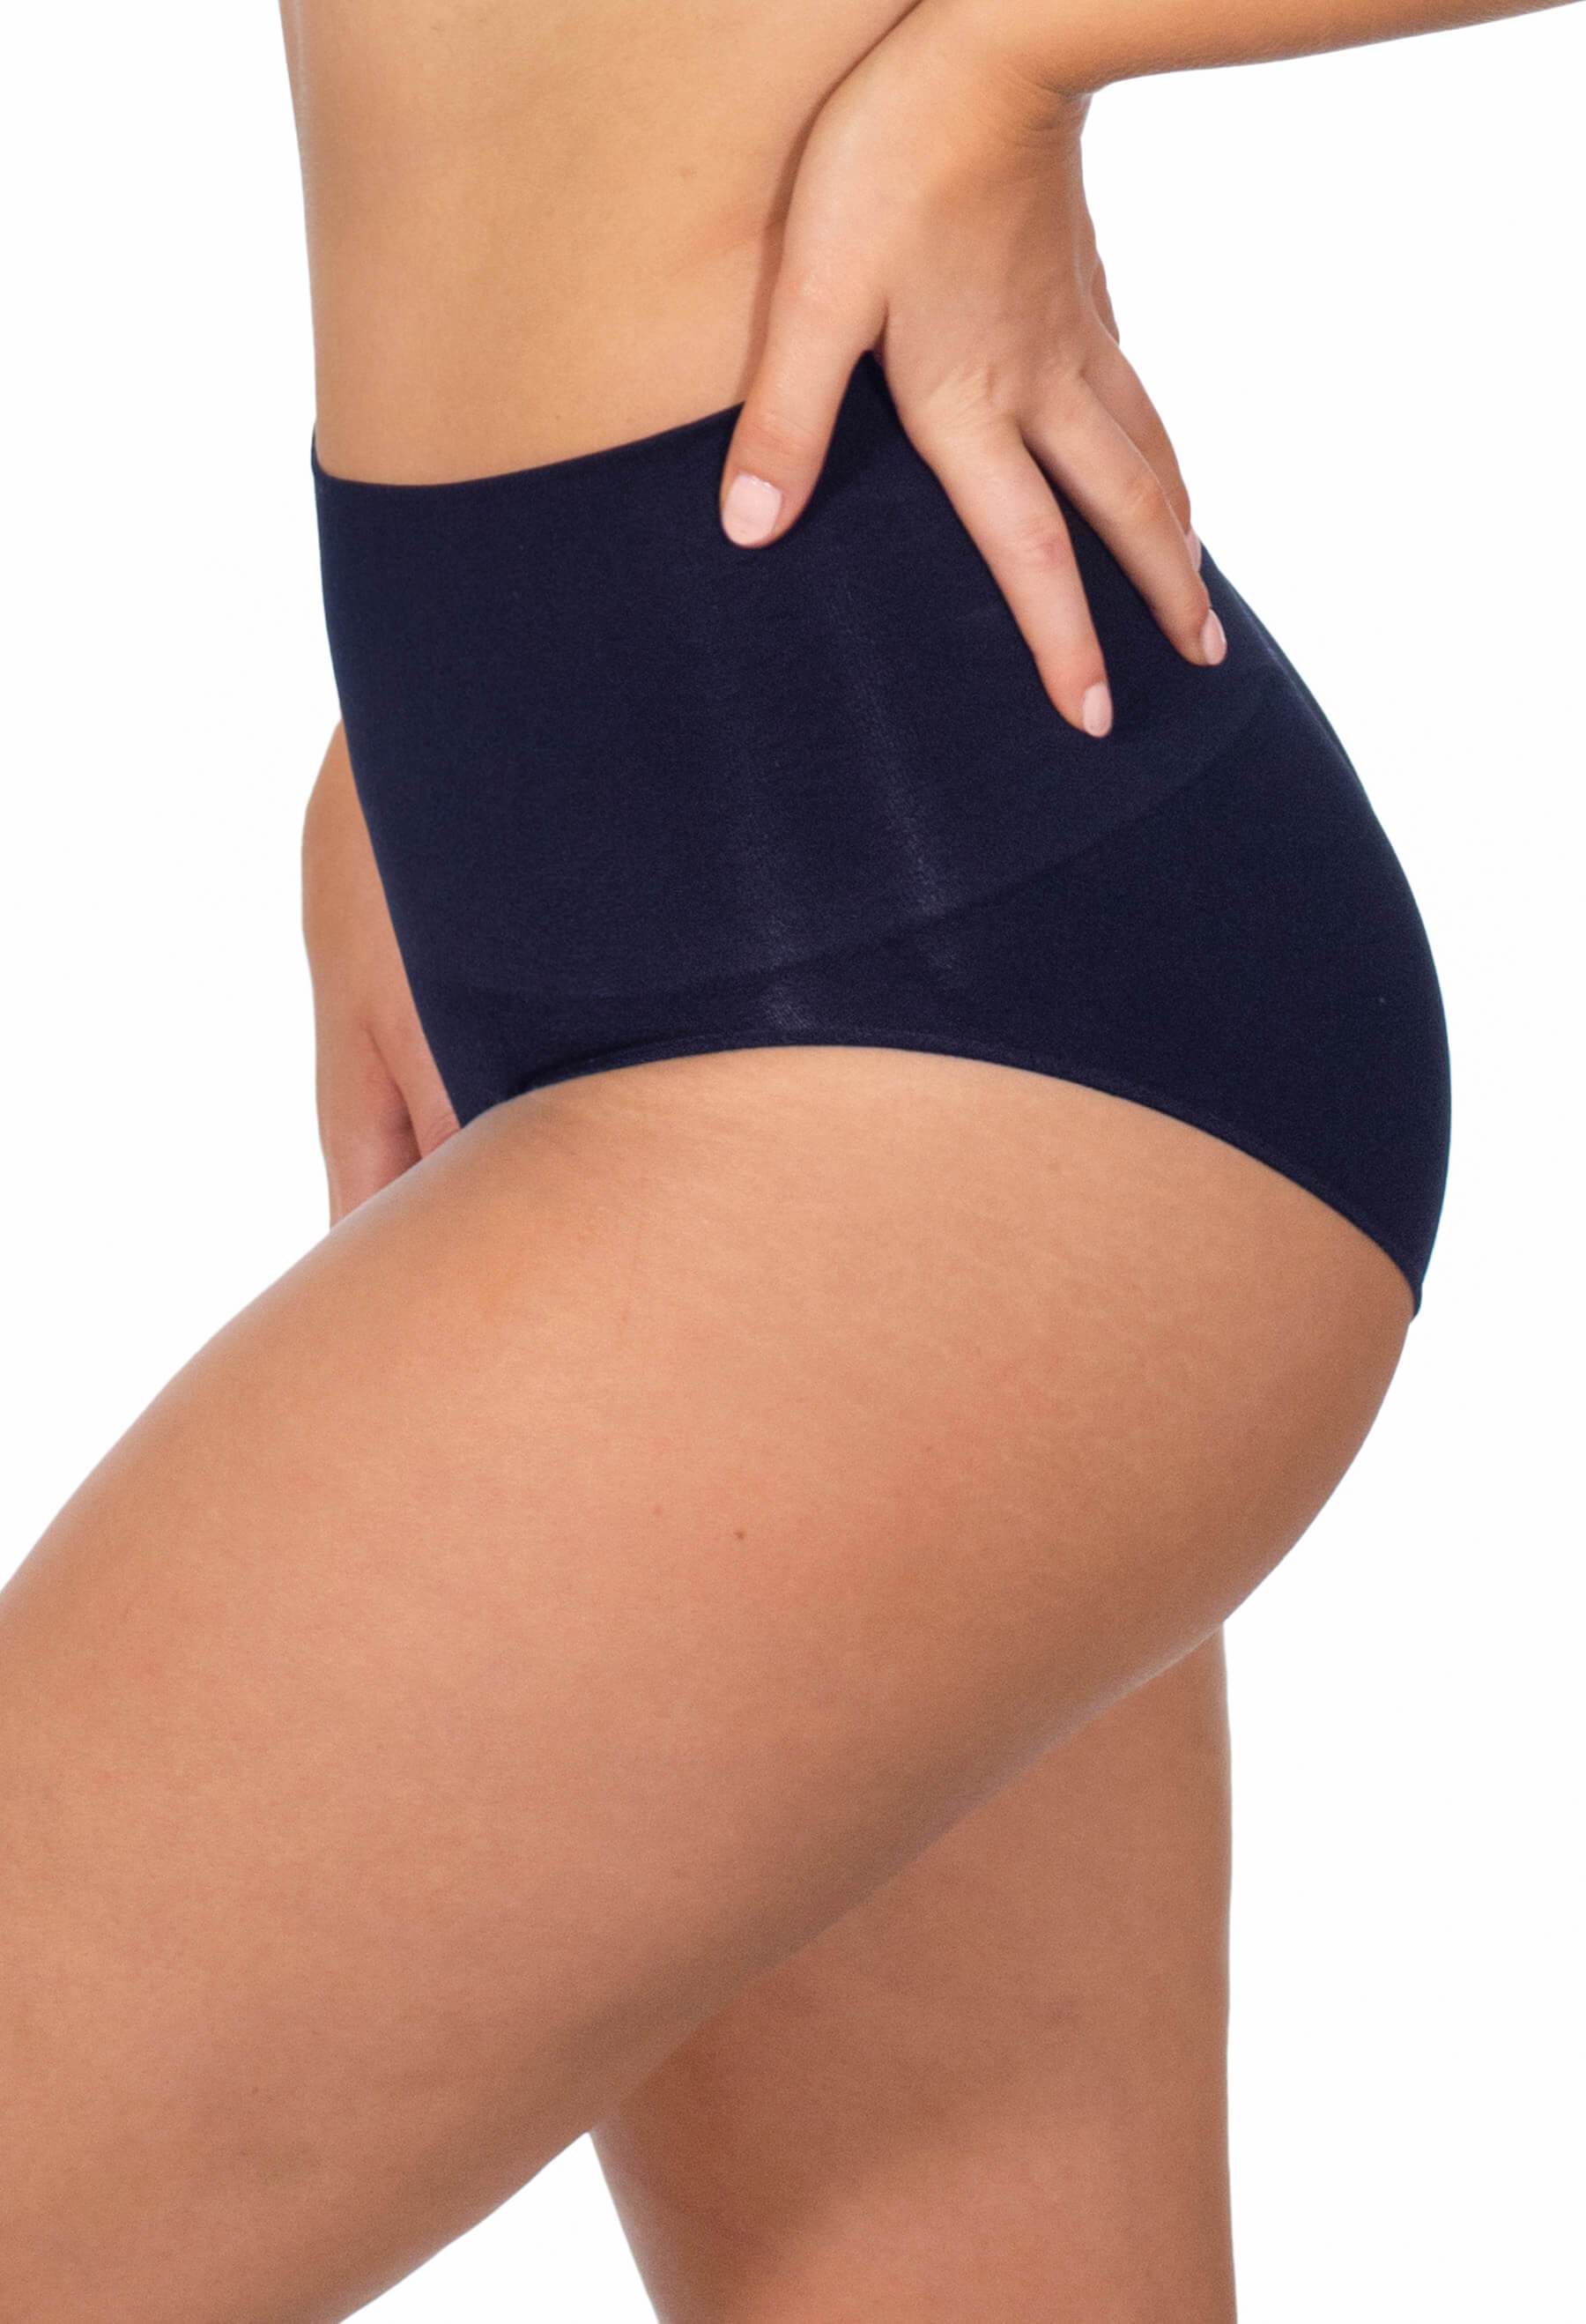 Power Shaping Brief 3pk - Flattens Lower Belly, Comfy Everyday